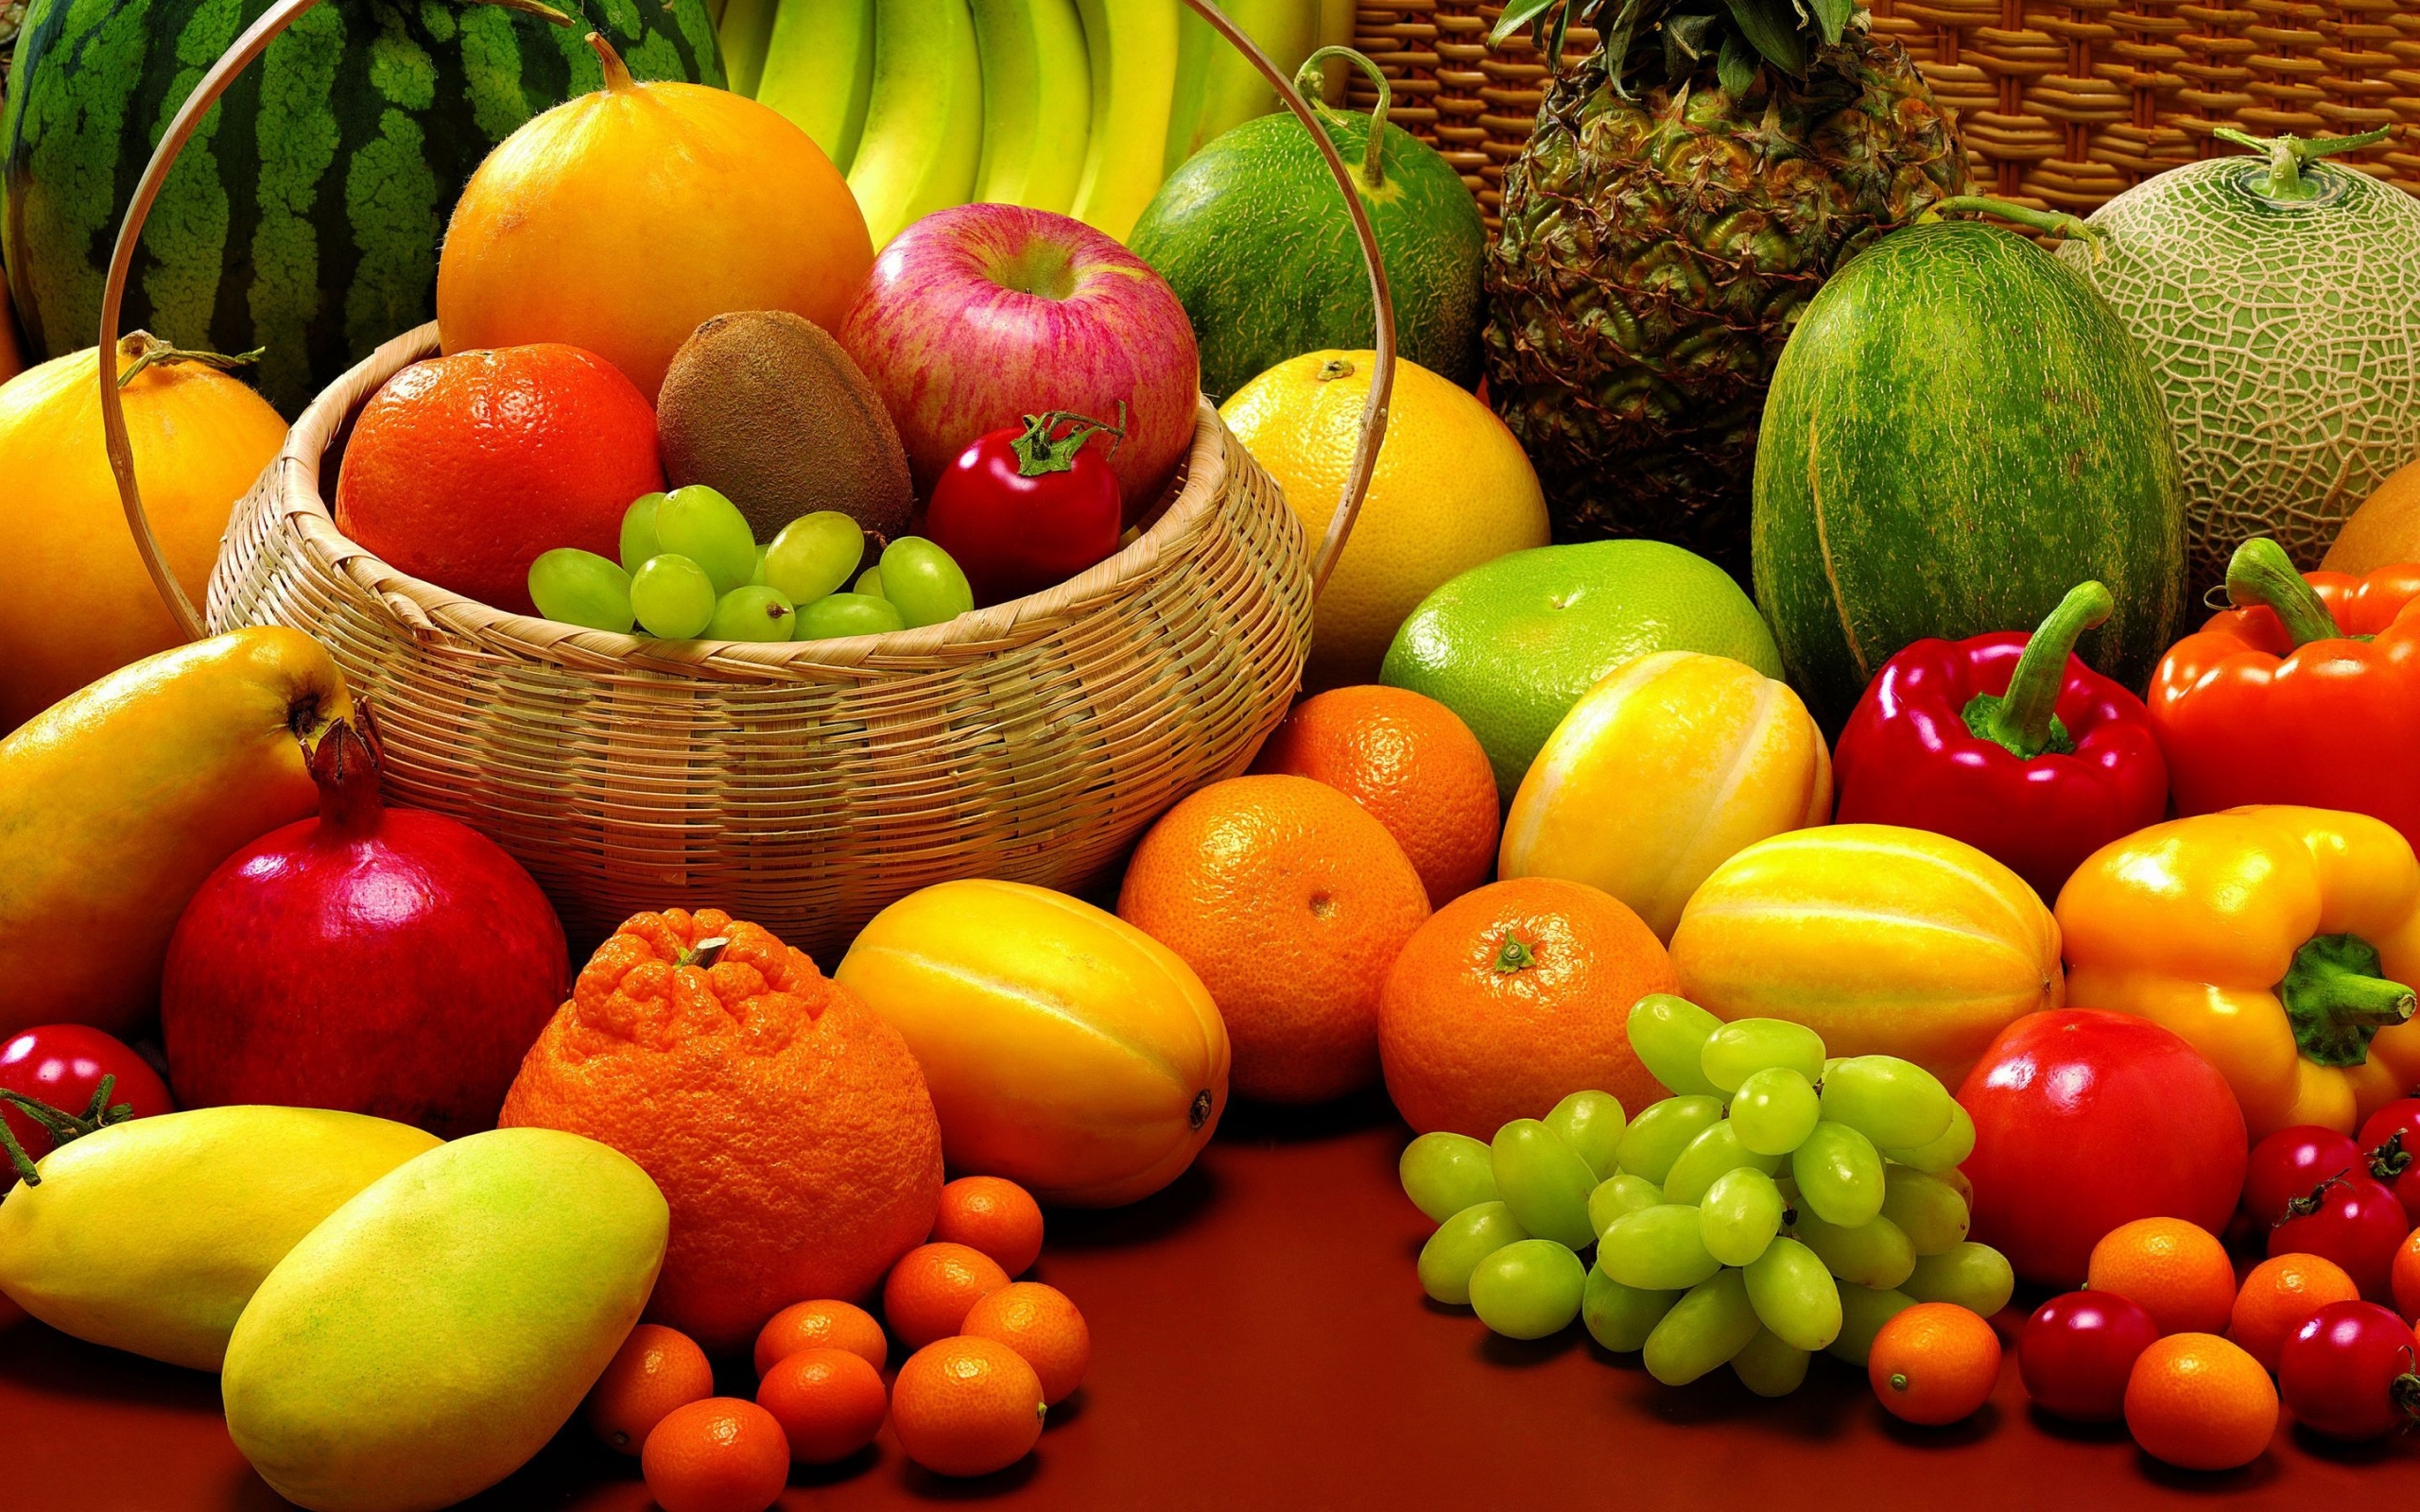 Fruits and Veggies for 2560 x 1600 widescreen resolution